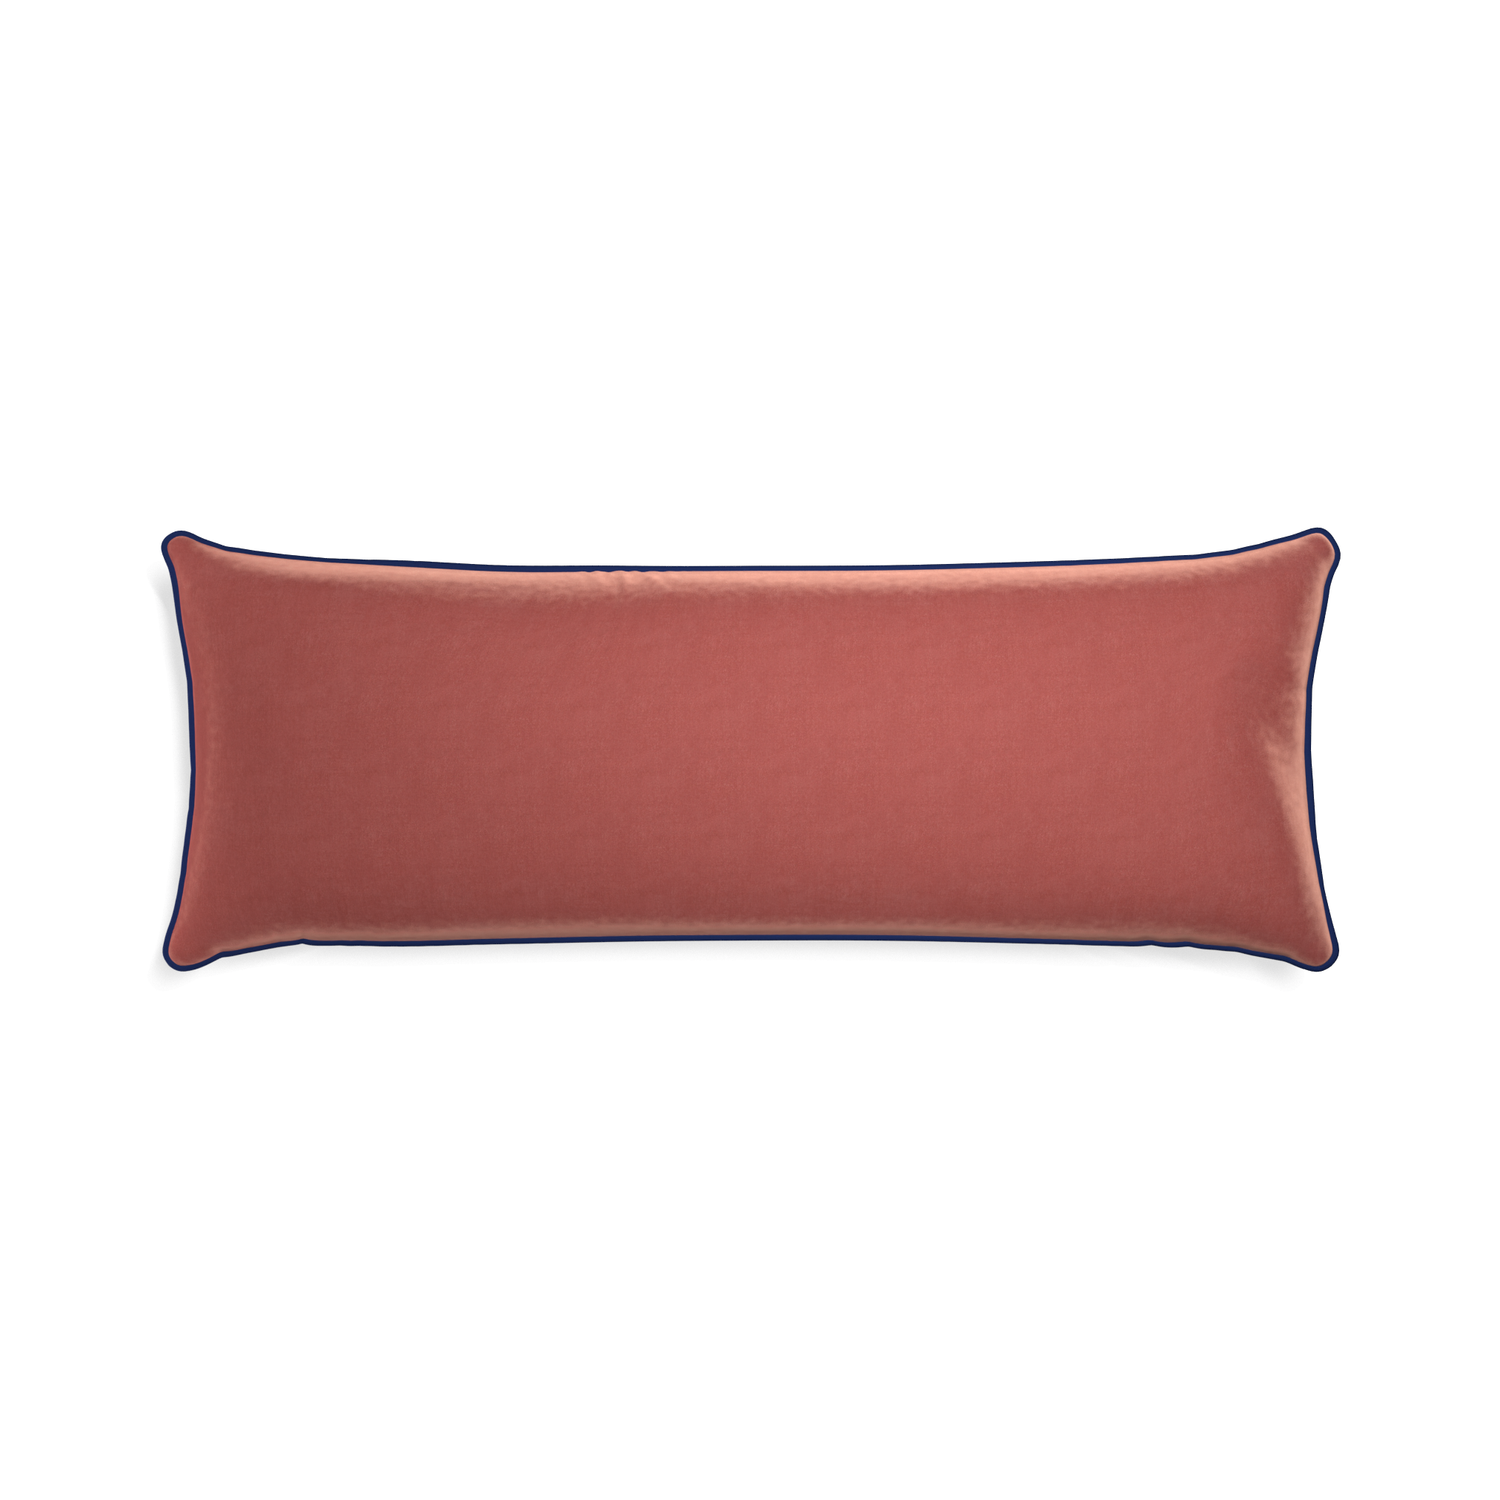 rectangle coral velvet pillow with navy blue piping